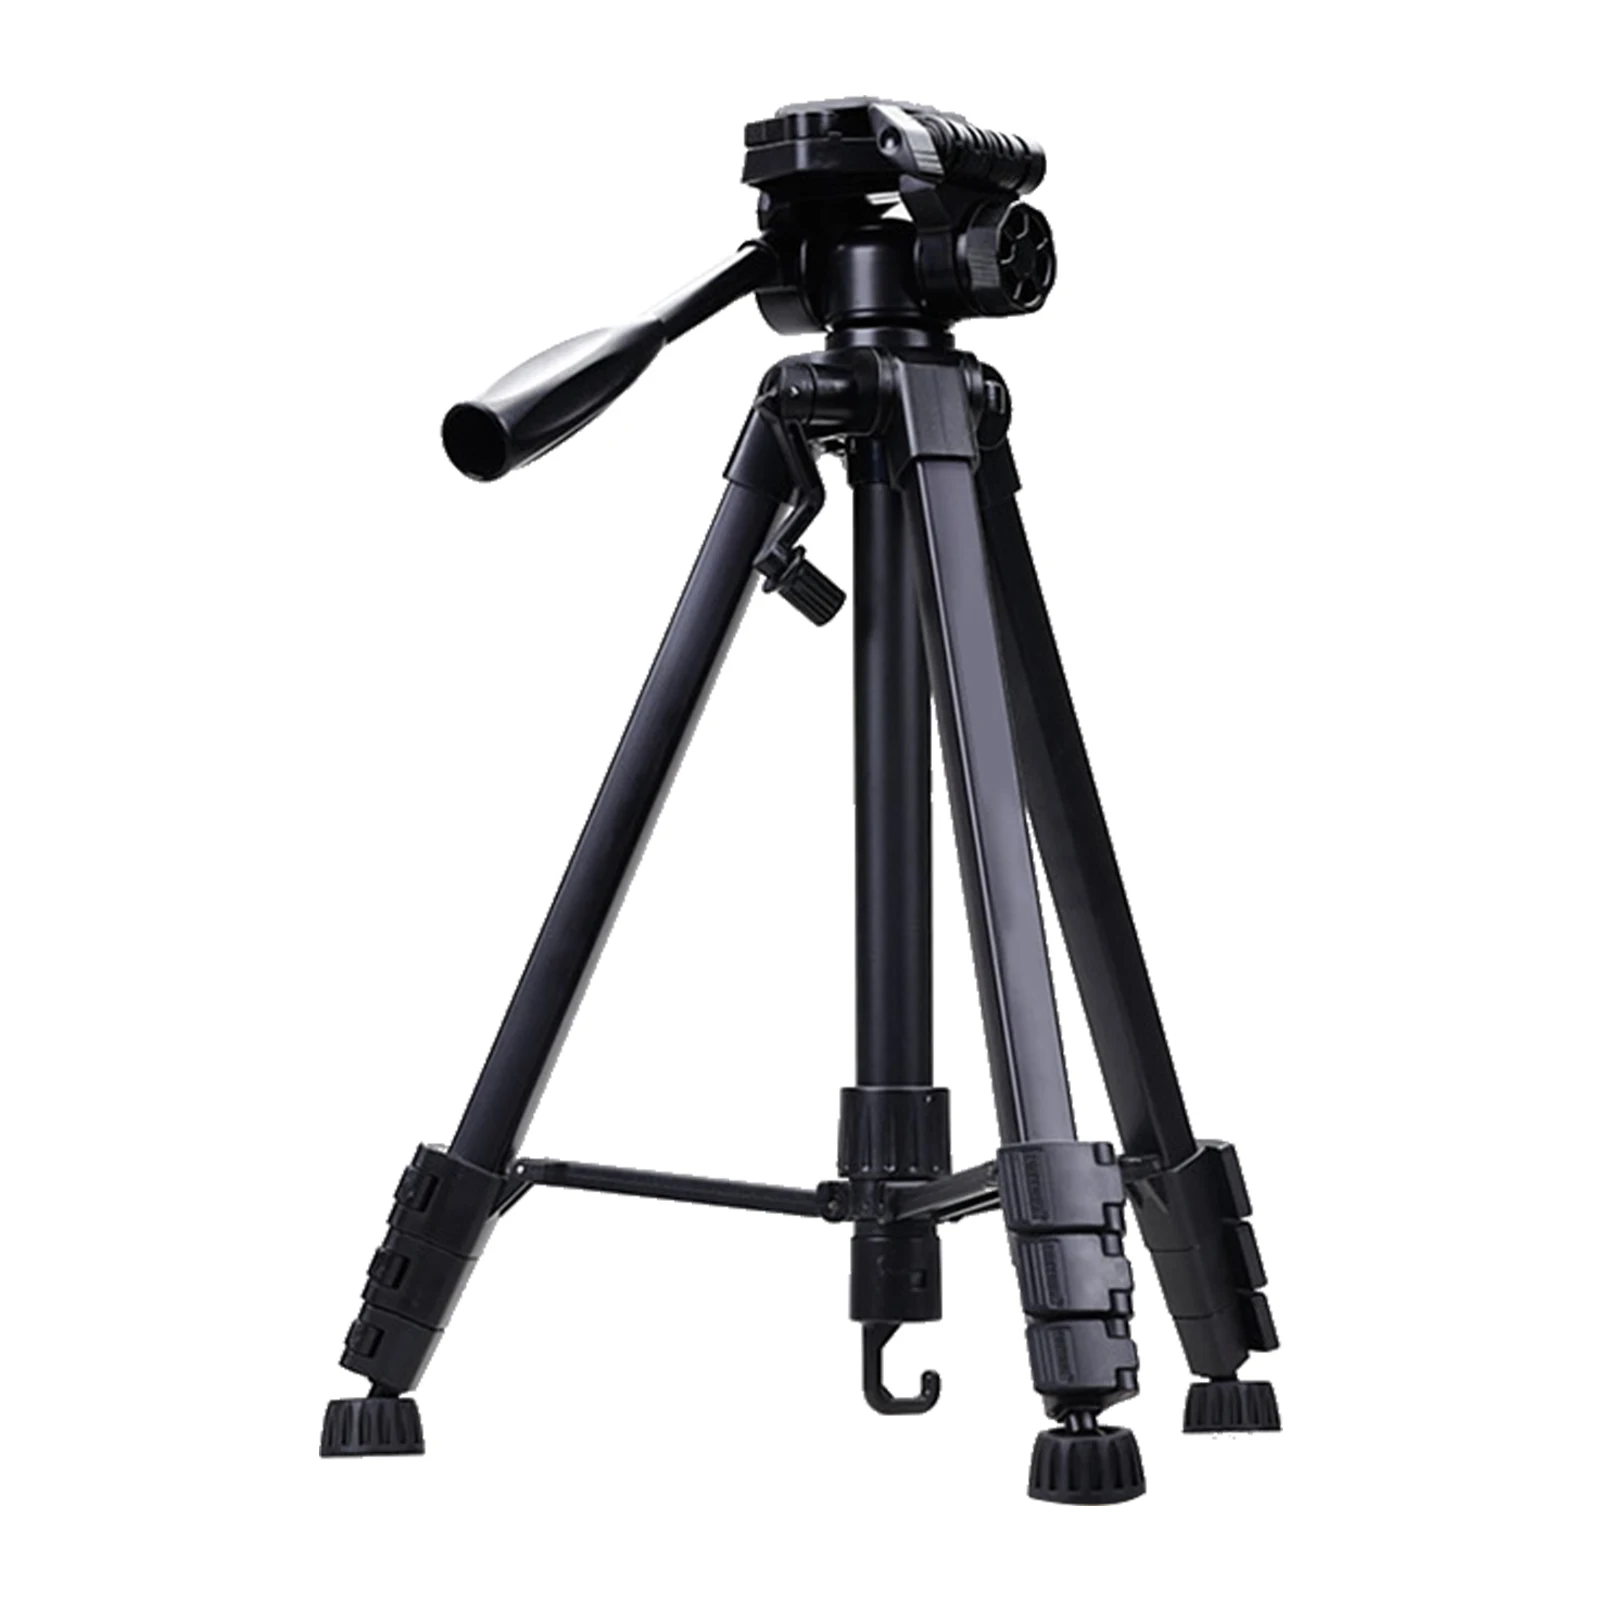 

Camera Tripod Stable Black Photography Live Streaming For DSLR Support Aluminum Alloy Outdoor Portable Video Recording Folding